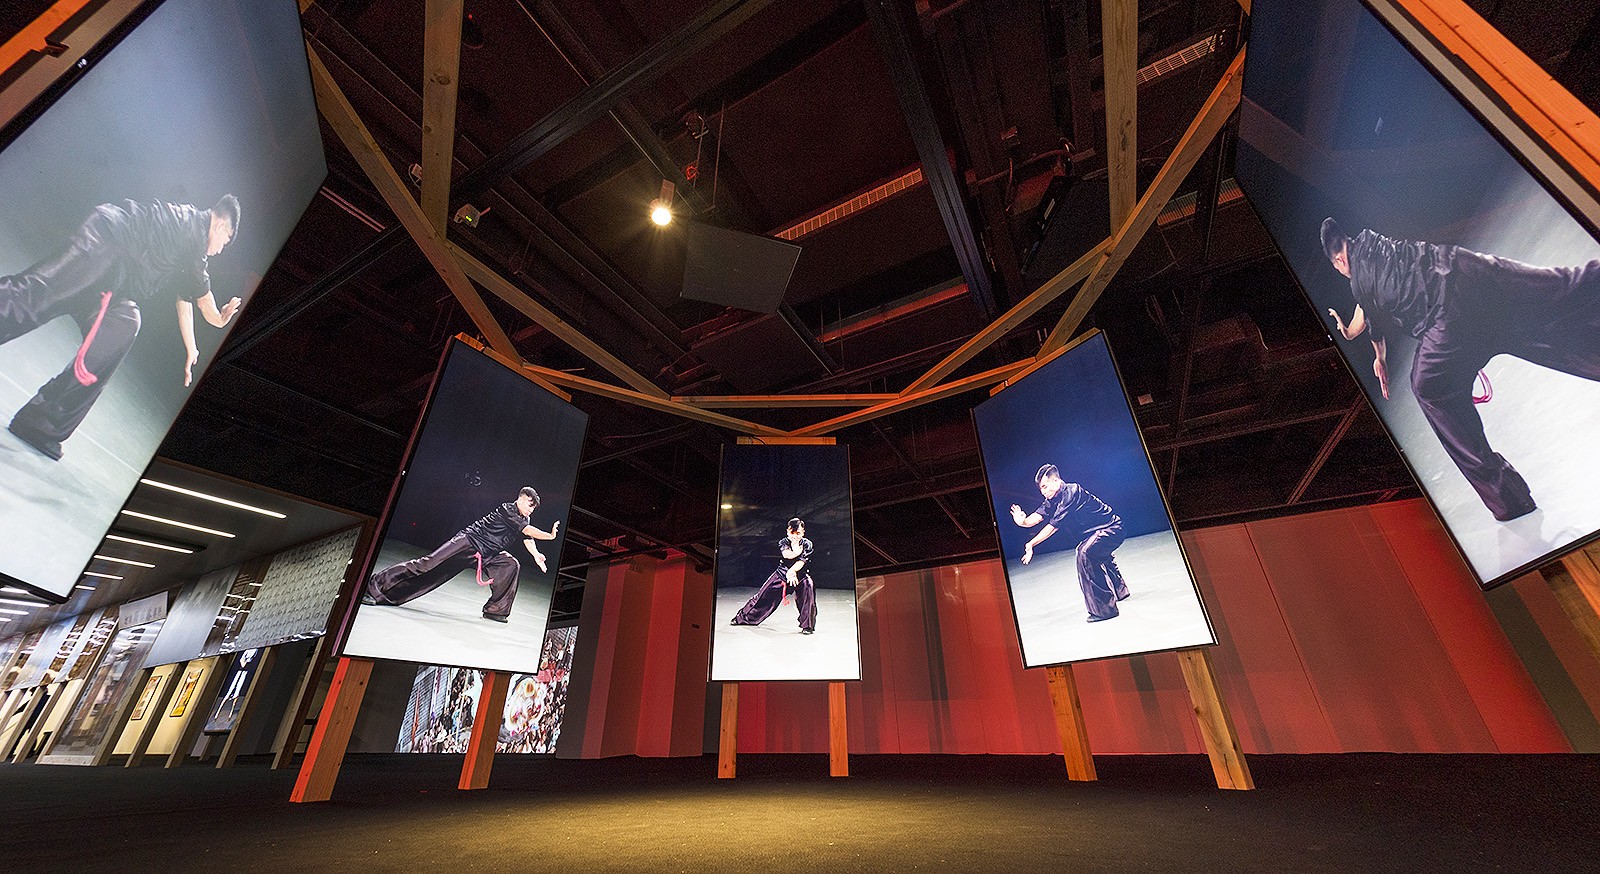 “Perspectives of Hung Kuen in Motion” developed by CityU’s School of Creative Media